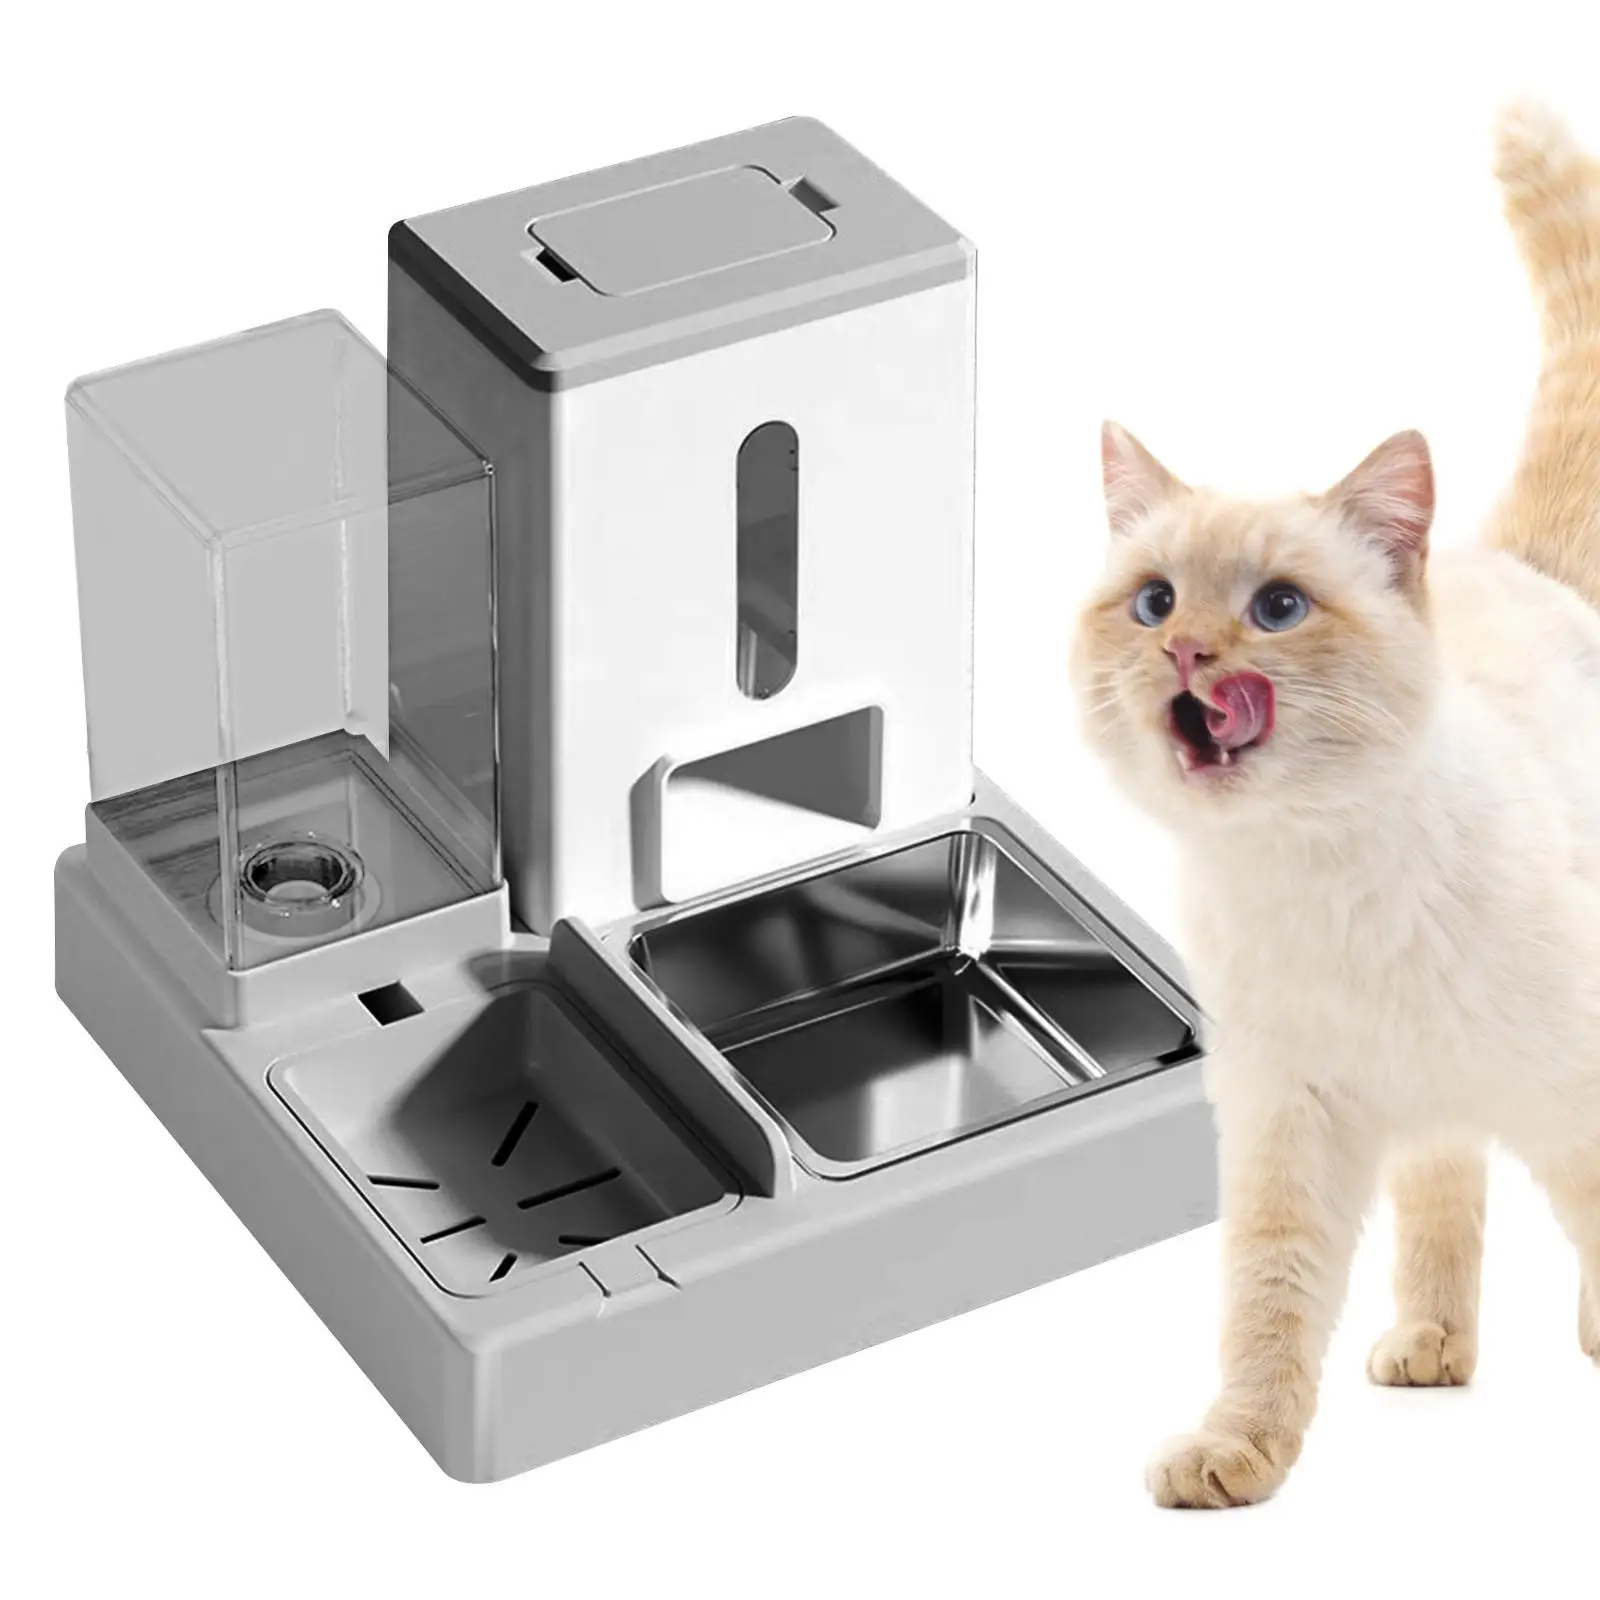 2 in 1 Cat Bowl and Water Feeder Detachable Stainless Steel Bowl Automatic Cat Drinker Bowl for Cats Small Animals Puppy Dogs